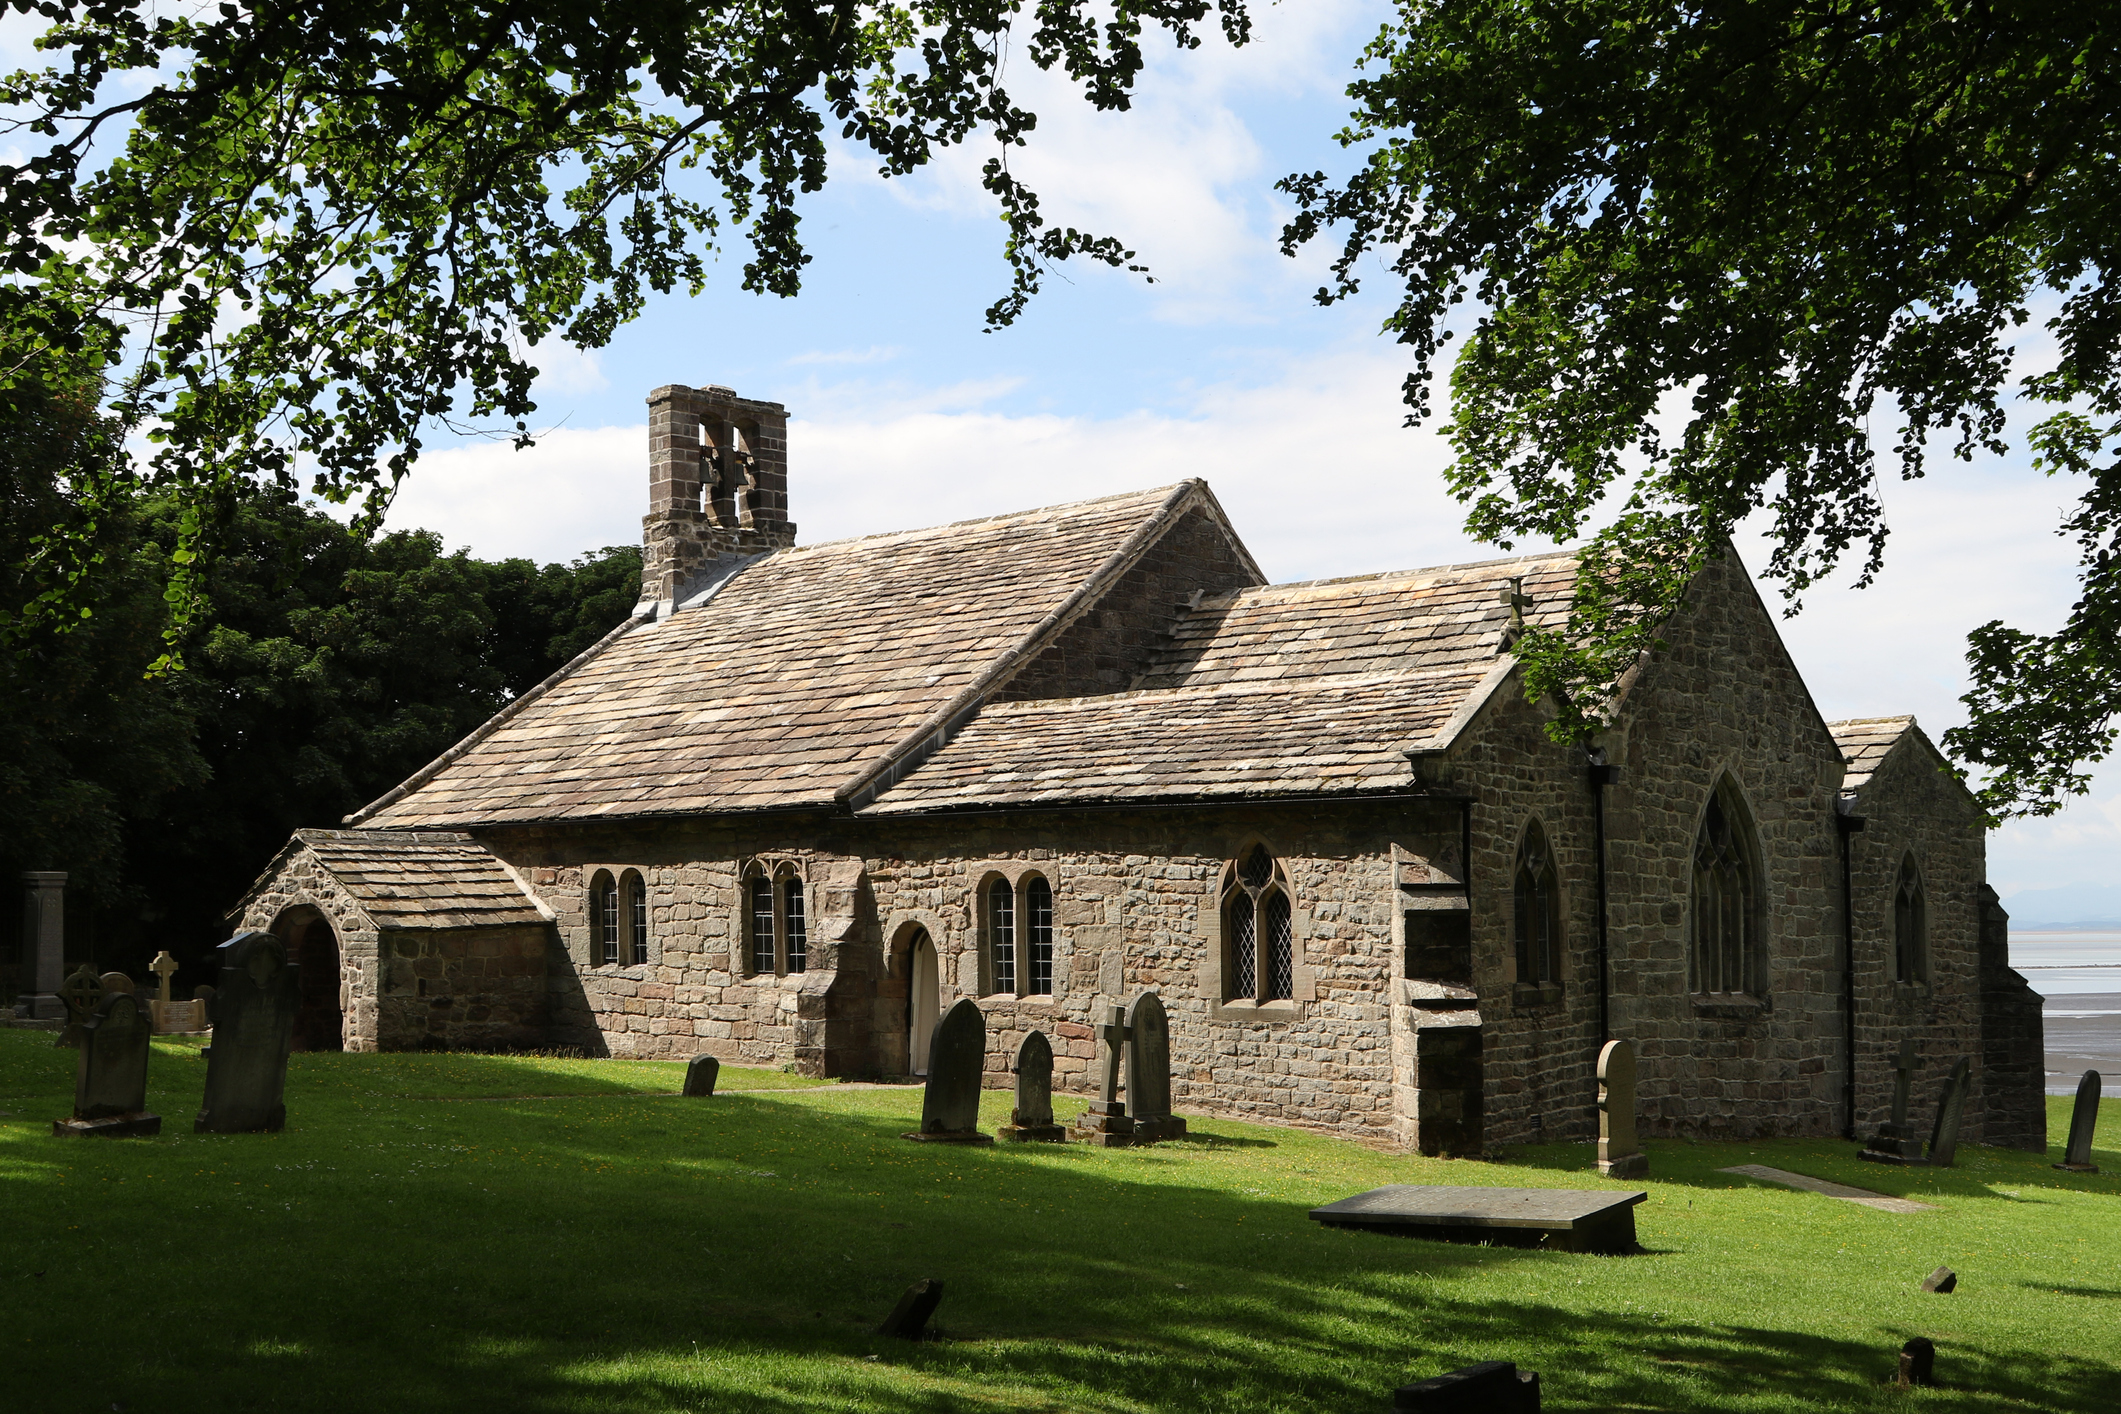 St. Peter's Church in the village of Heysham, Lancashire, in the north of England.